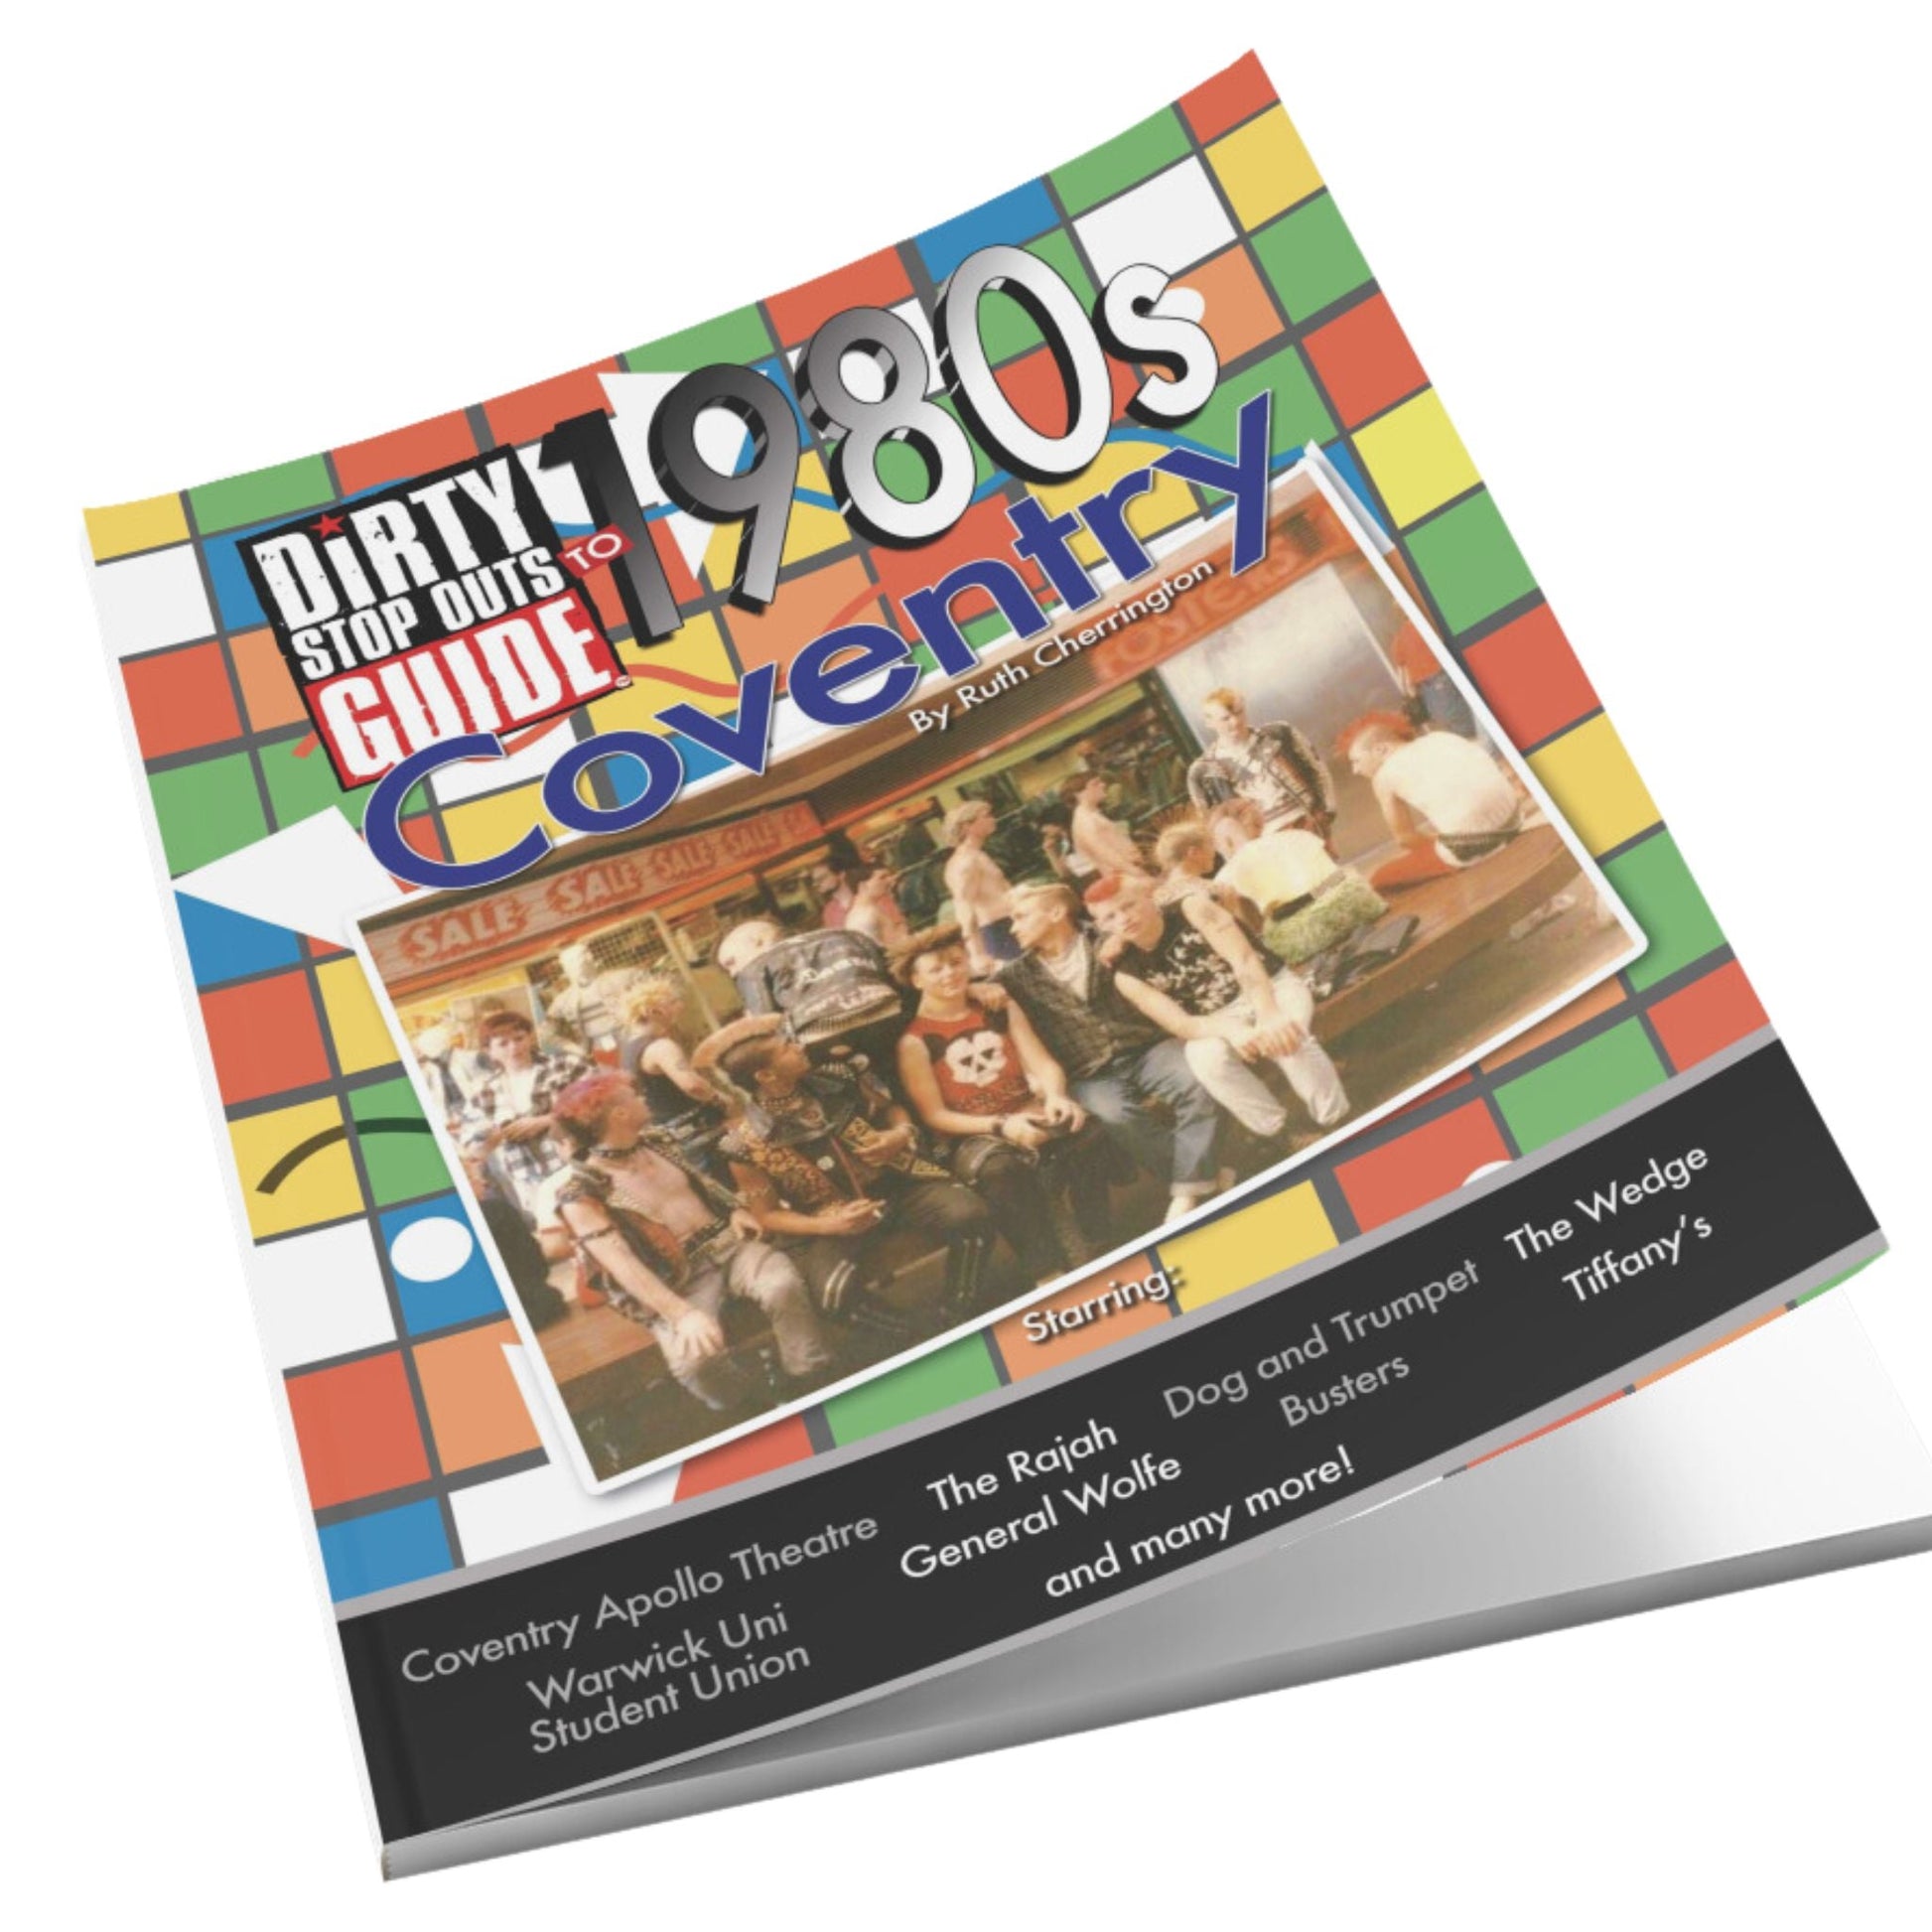 Dirty Stop Out's Guide to 1980s Coventry - now back in print for a limited time! - Dirty Stop Outs